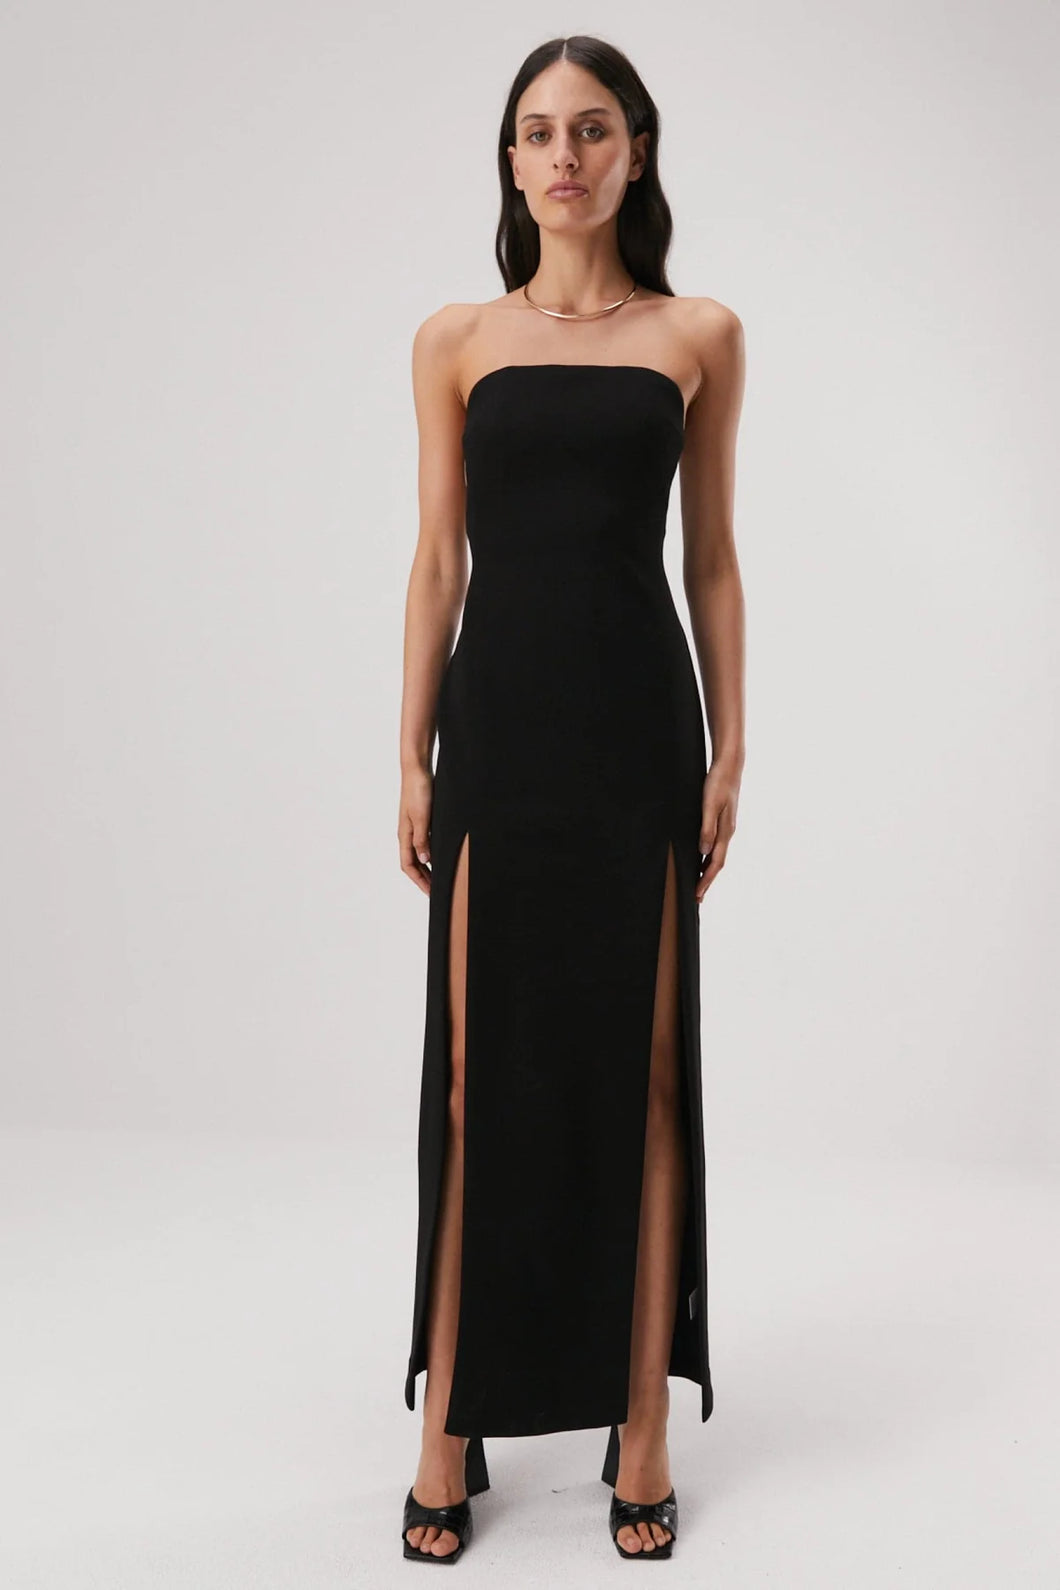 MISHA - ENSLEY STRAPLESS GOWN